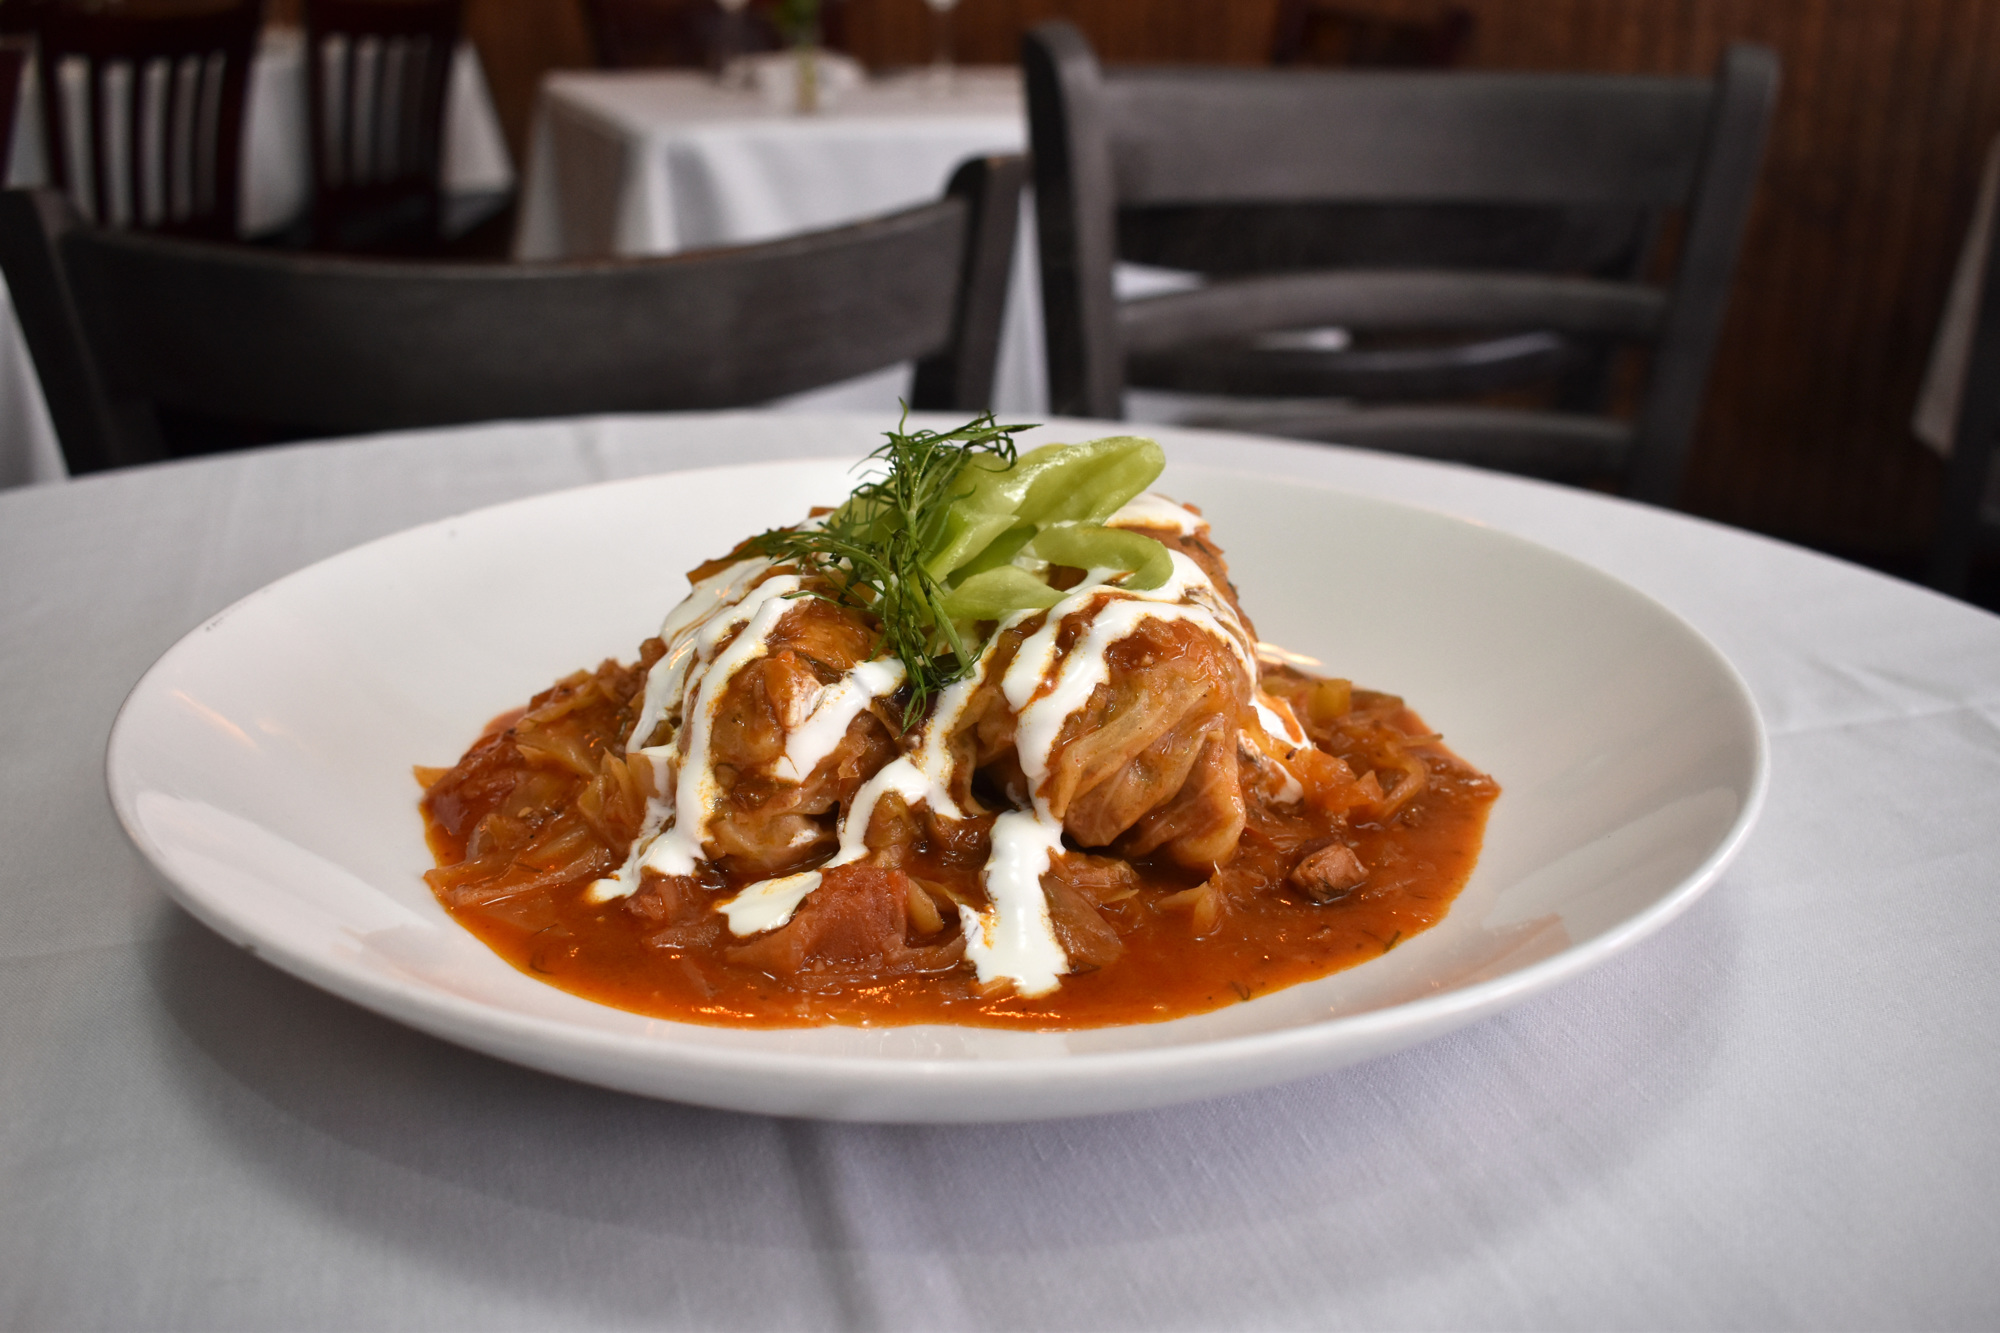 Other than the stuffed cabbage, entree options include tenderloin steak, grilled salmon, fish paprikash and stuffed chicken. Photo by Niki Kottmann